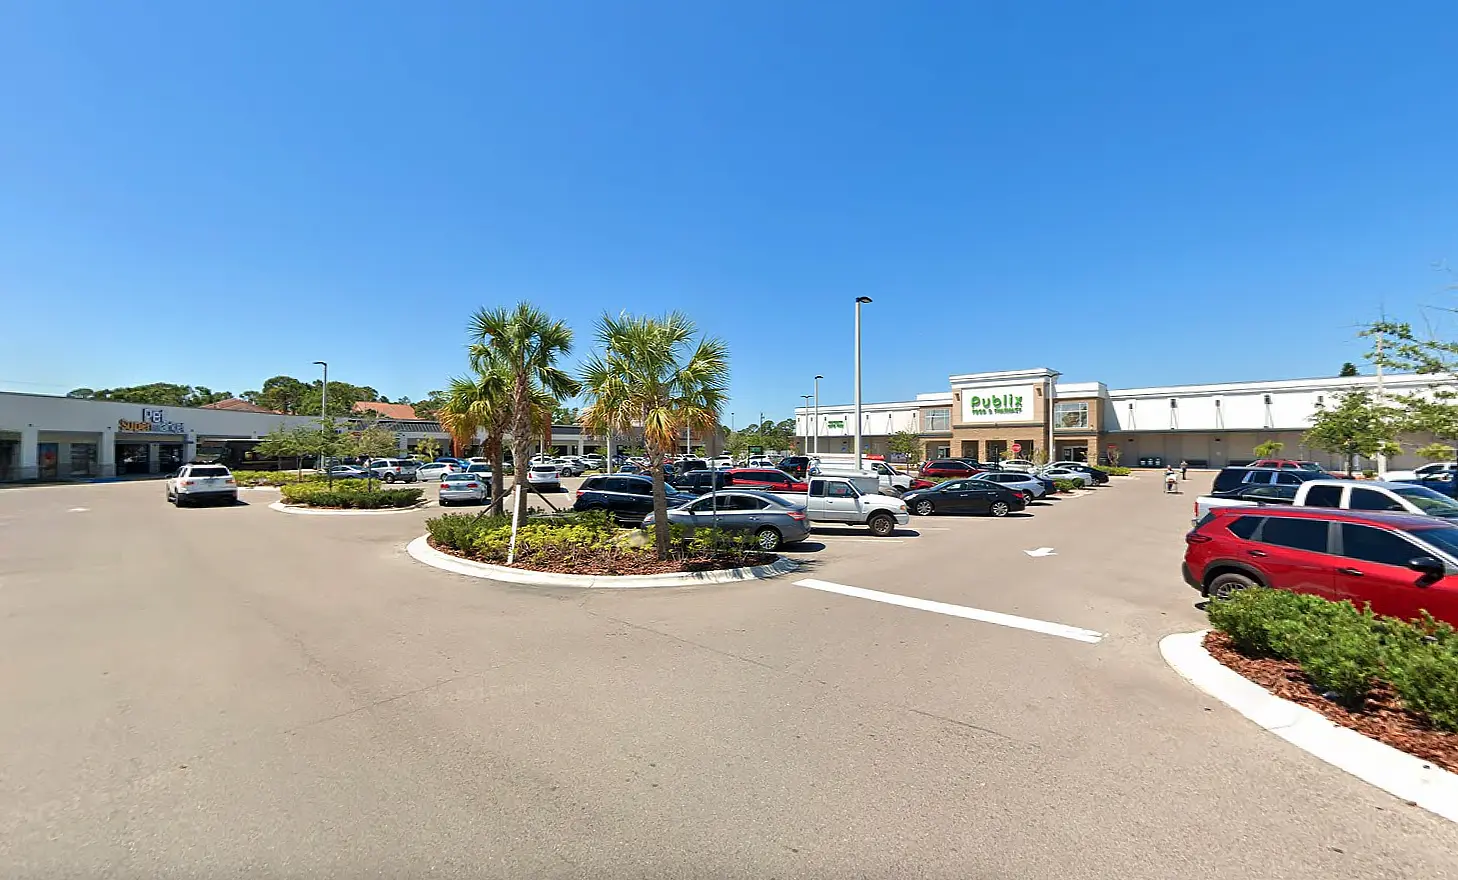 The location of Apex's environmental support site, an open-air shopping plaza from the view of the parking lot.